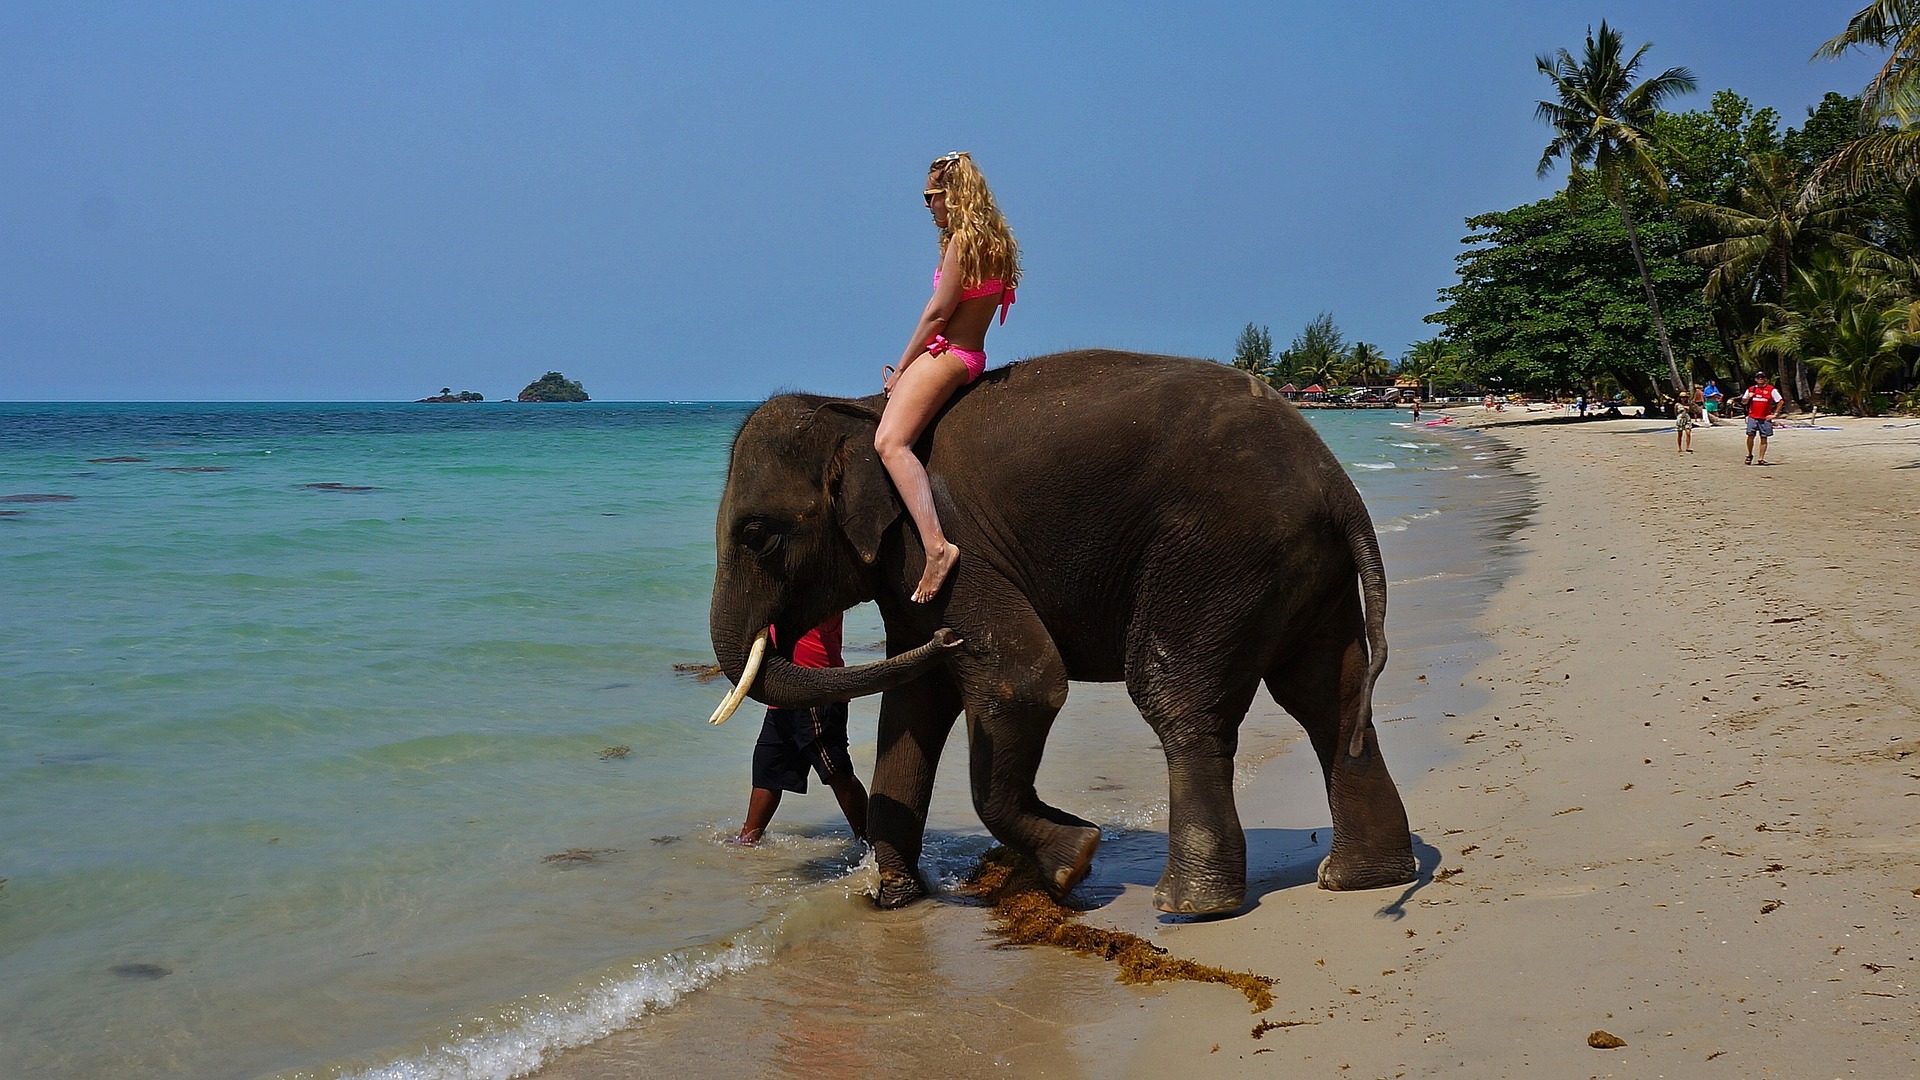 South East Asia Riding elephant at sea in Thailand